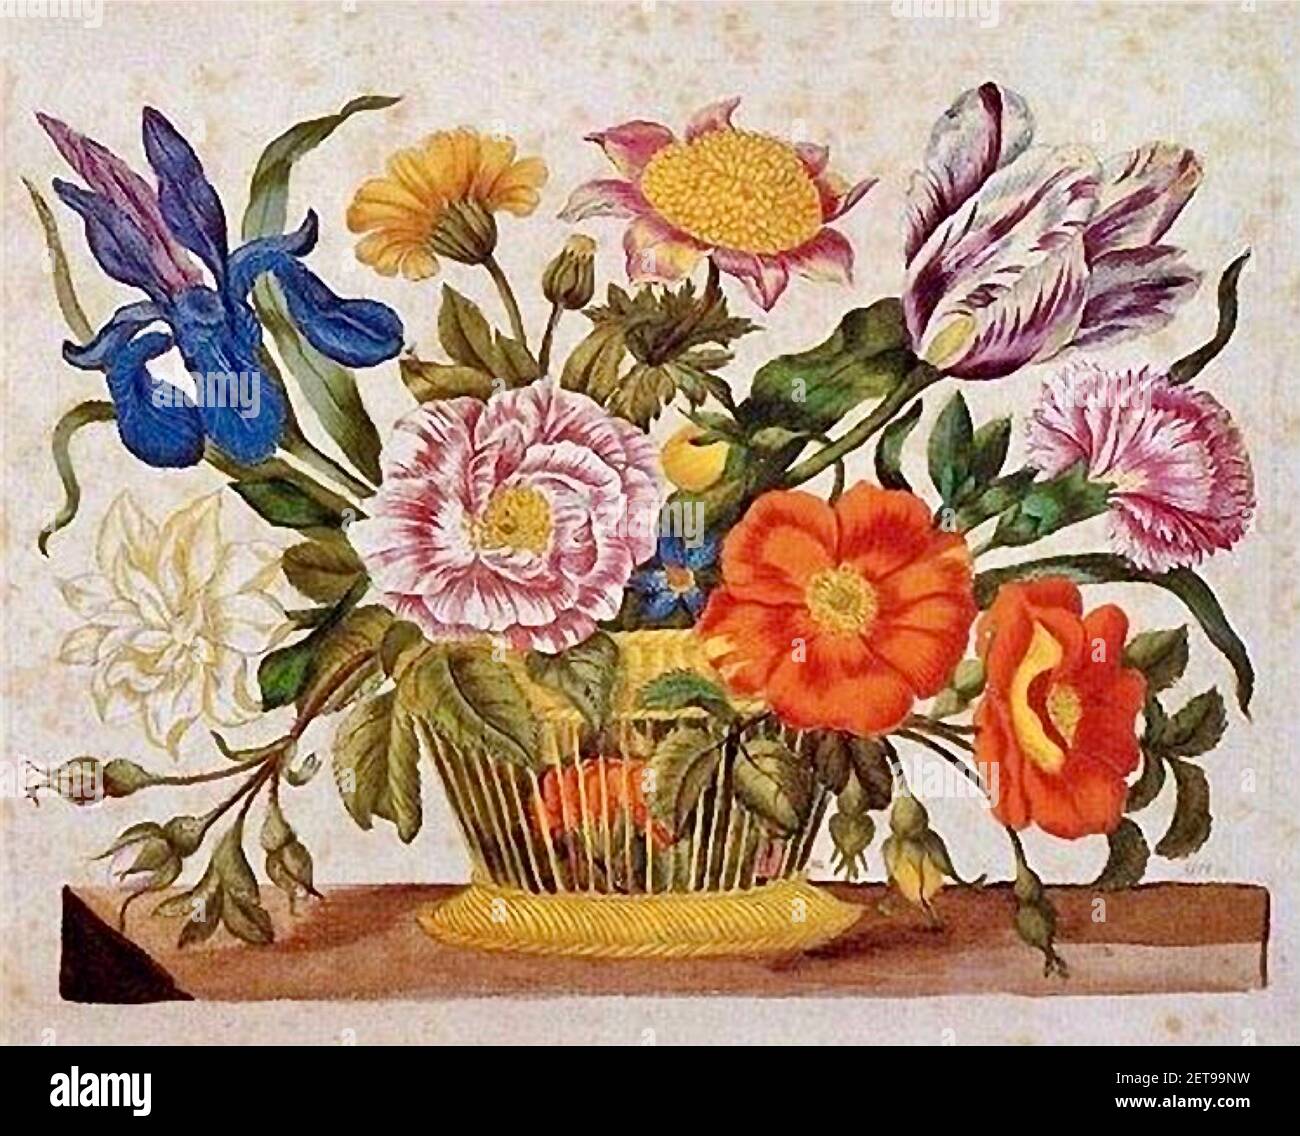 Maria Sibylla Merian floral artwork from 1680. Stock Photo